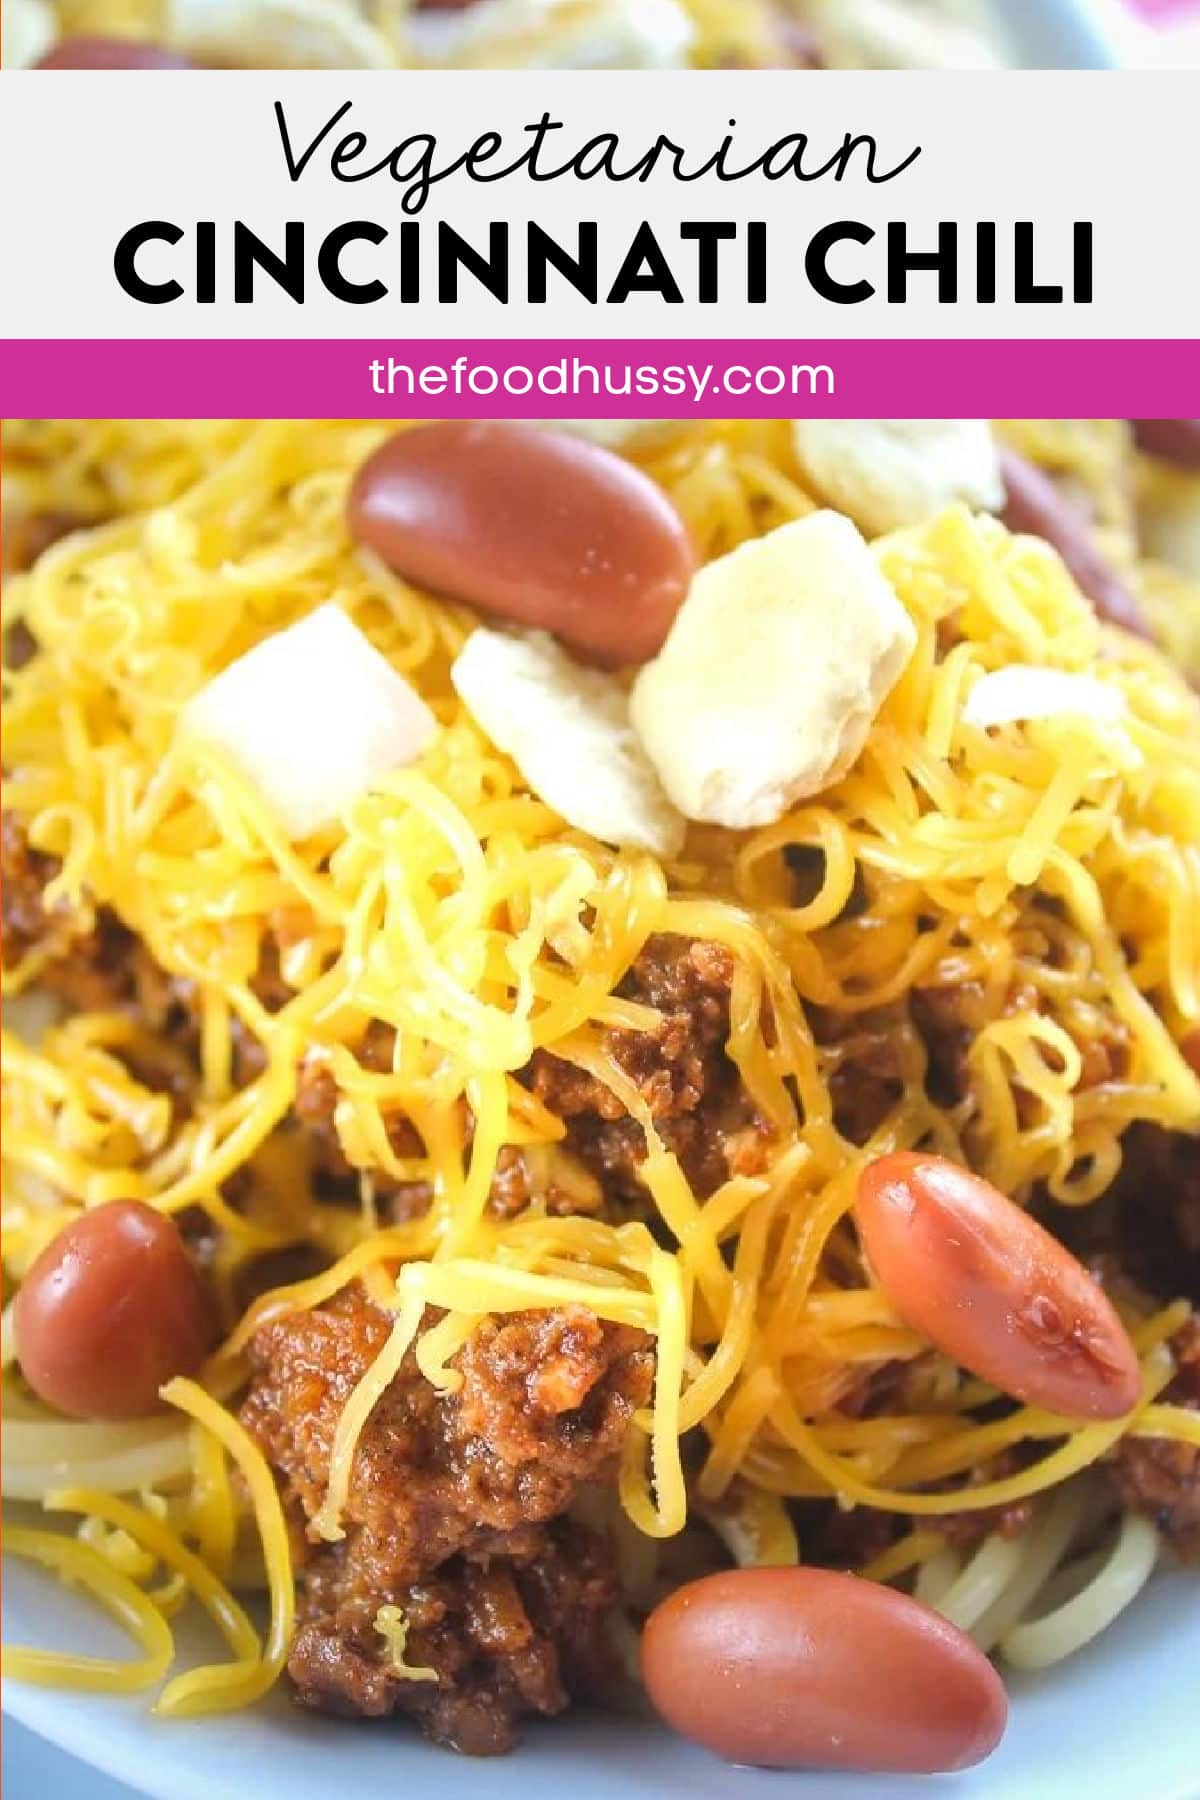 Vegetarian Cincinnati Chili has become a lot easier in this world where plant-based proteins are so much more prevalent. This recipe for a vegetarian version of Cincinnati chili also has some added veggies and a little spice for kick! via @foodhussy